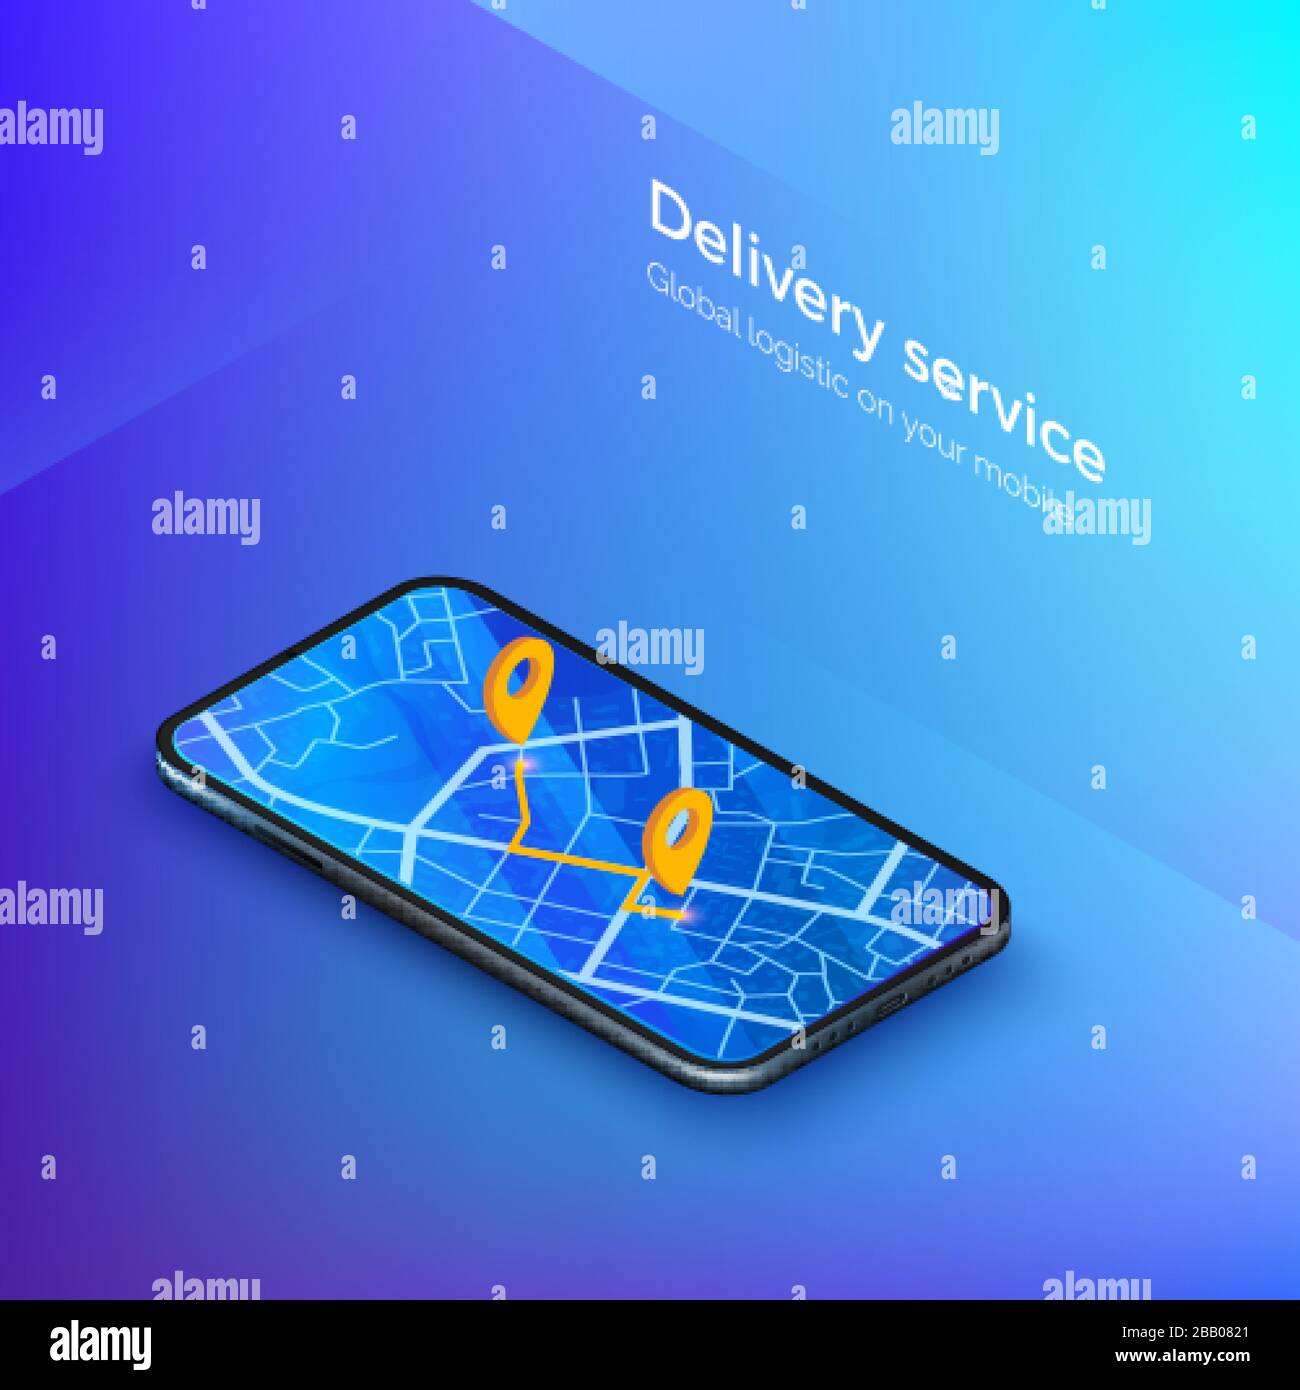 Delivery or taxi service isometric banner. Navigation or gps in mobile. Mobile app cab or shipping. City map on smartphone display with route. Vector Stock Vector